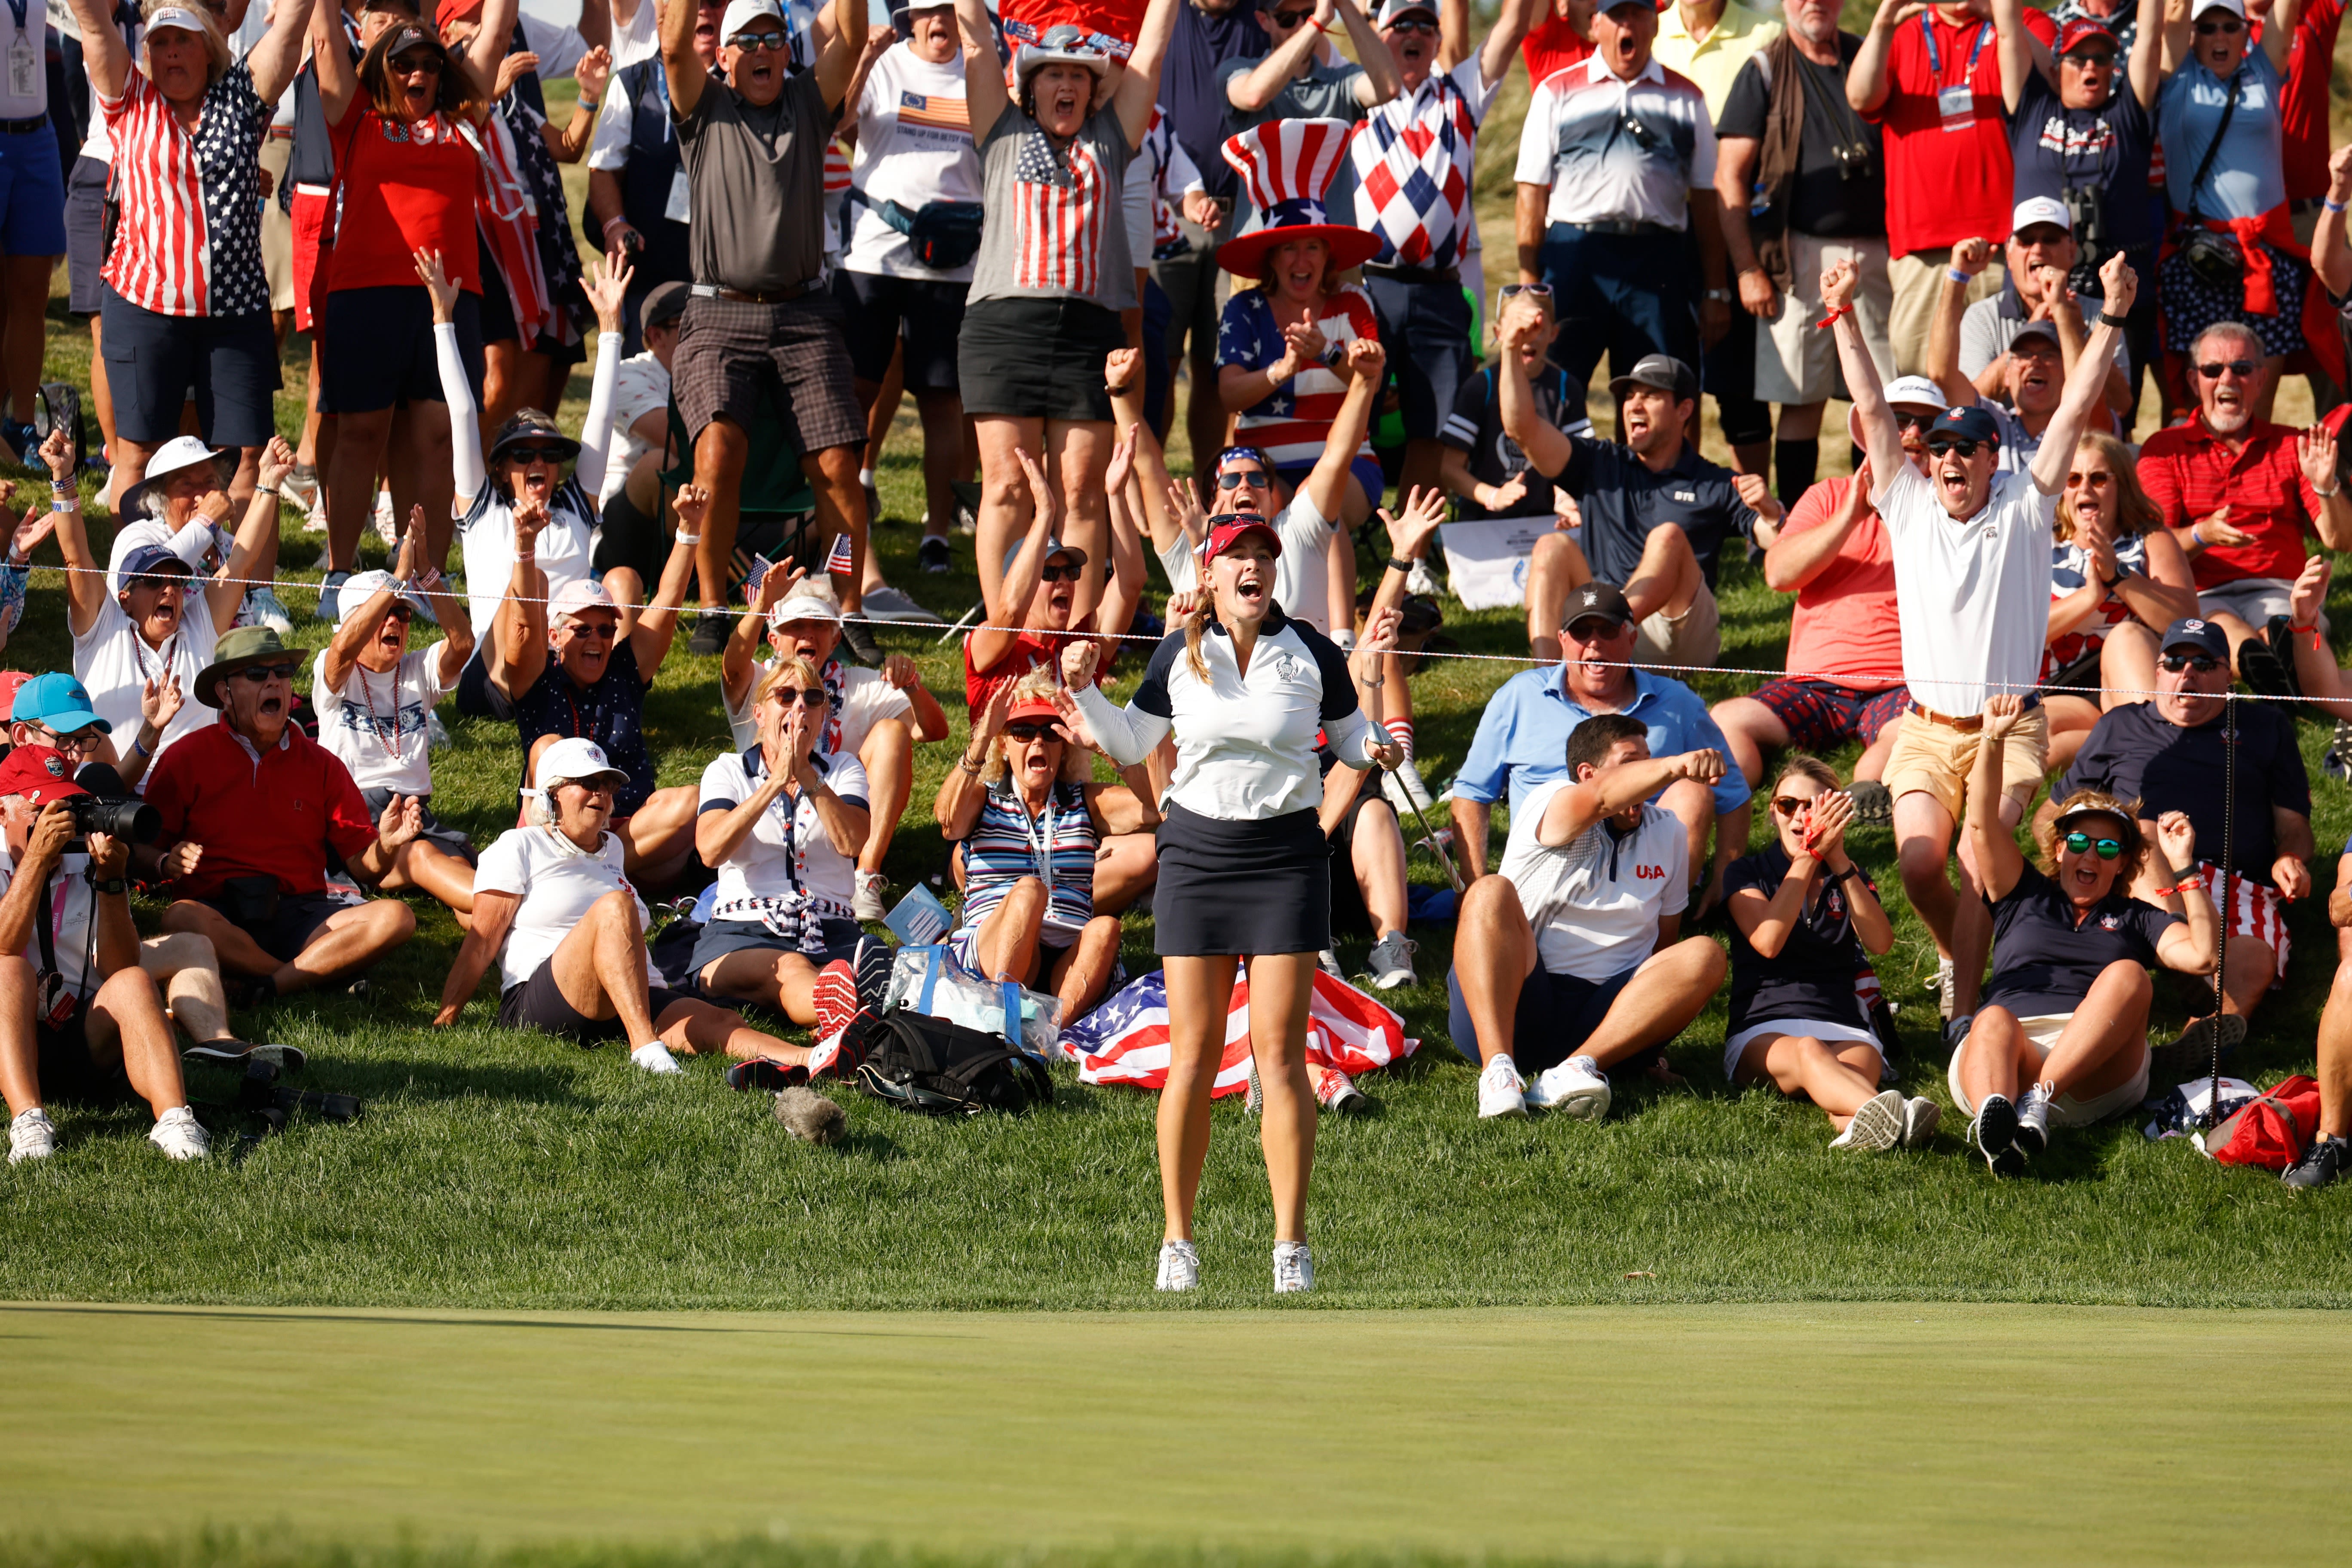 Jennifer Kupcho during the 2021 Solheim Cup. (Brian Spurlock/Icon Sportswire via Getty Images)